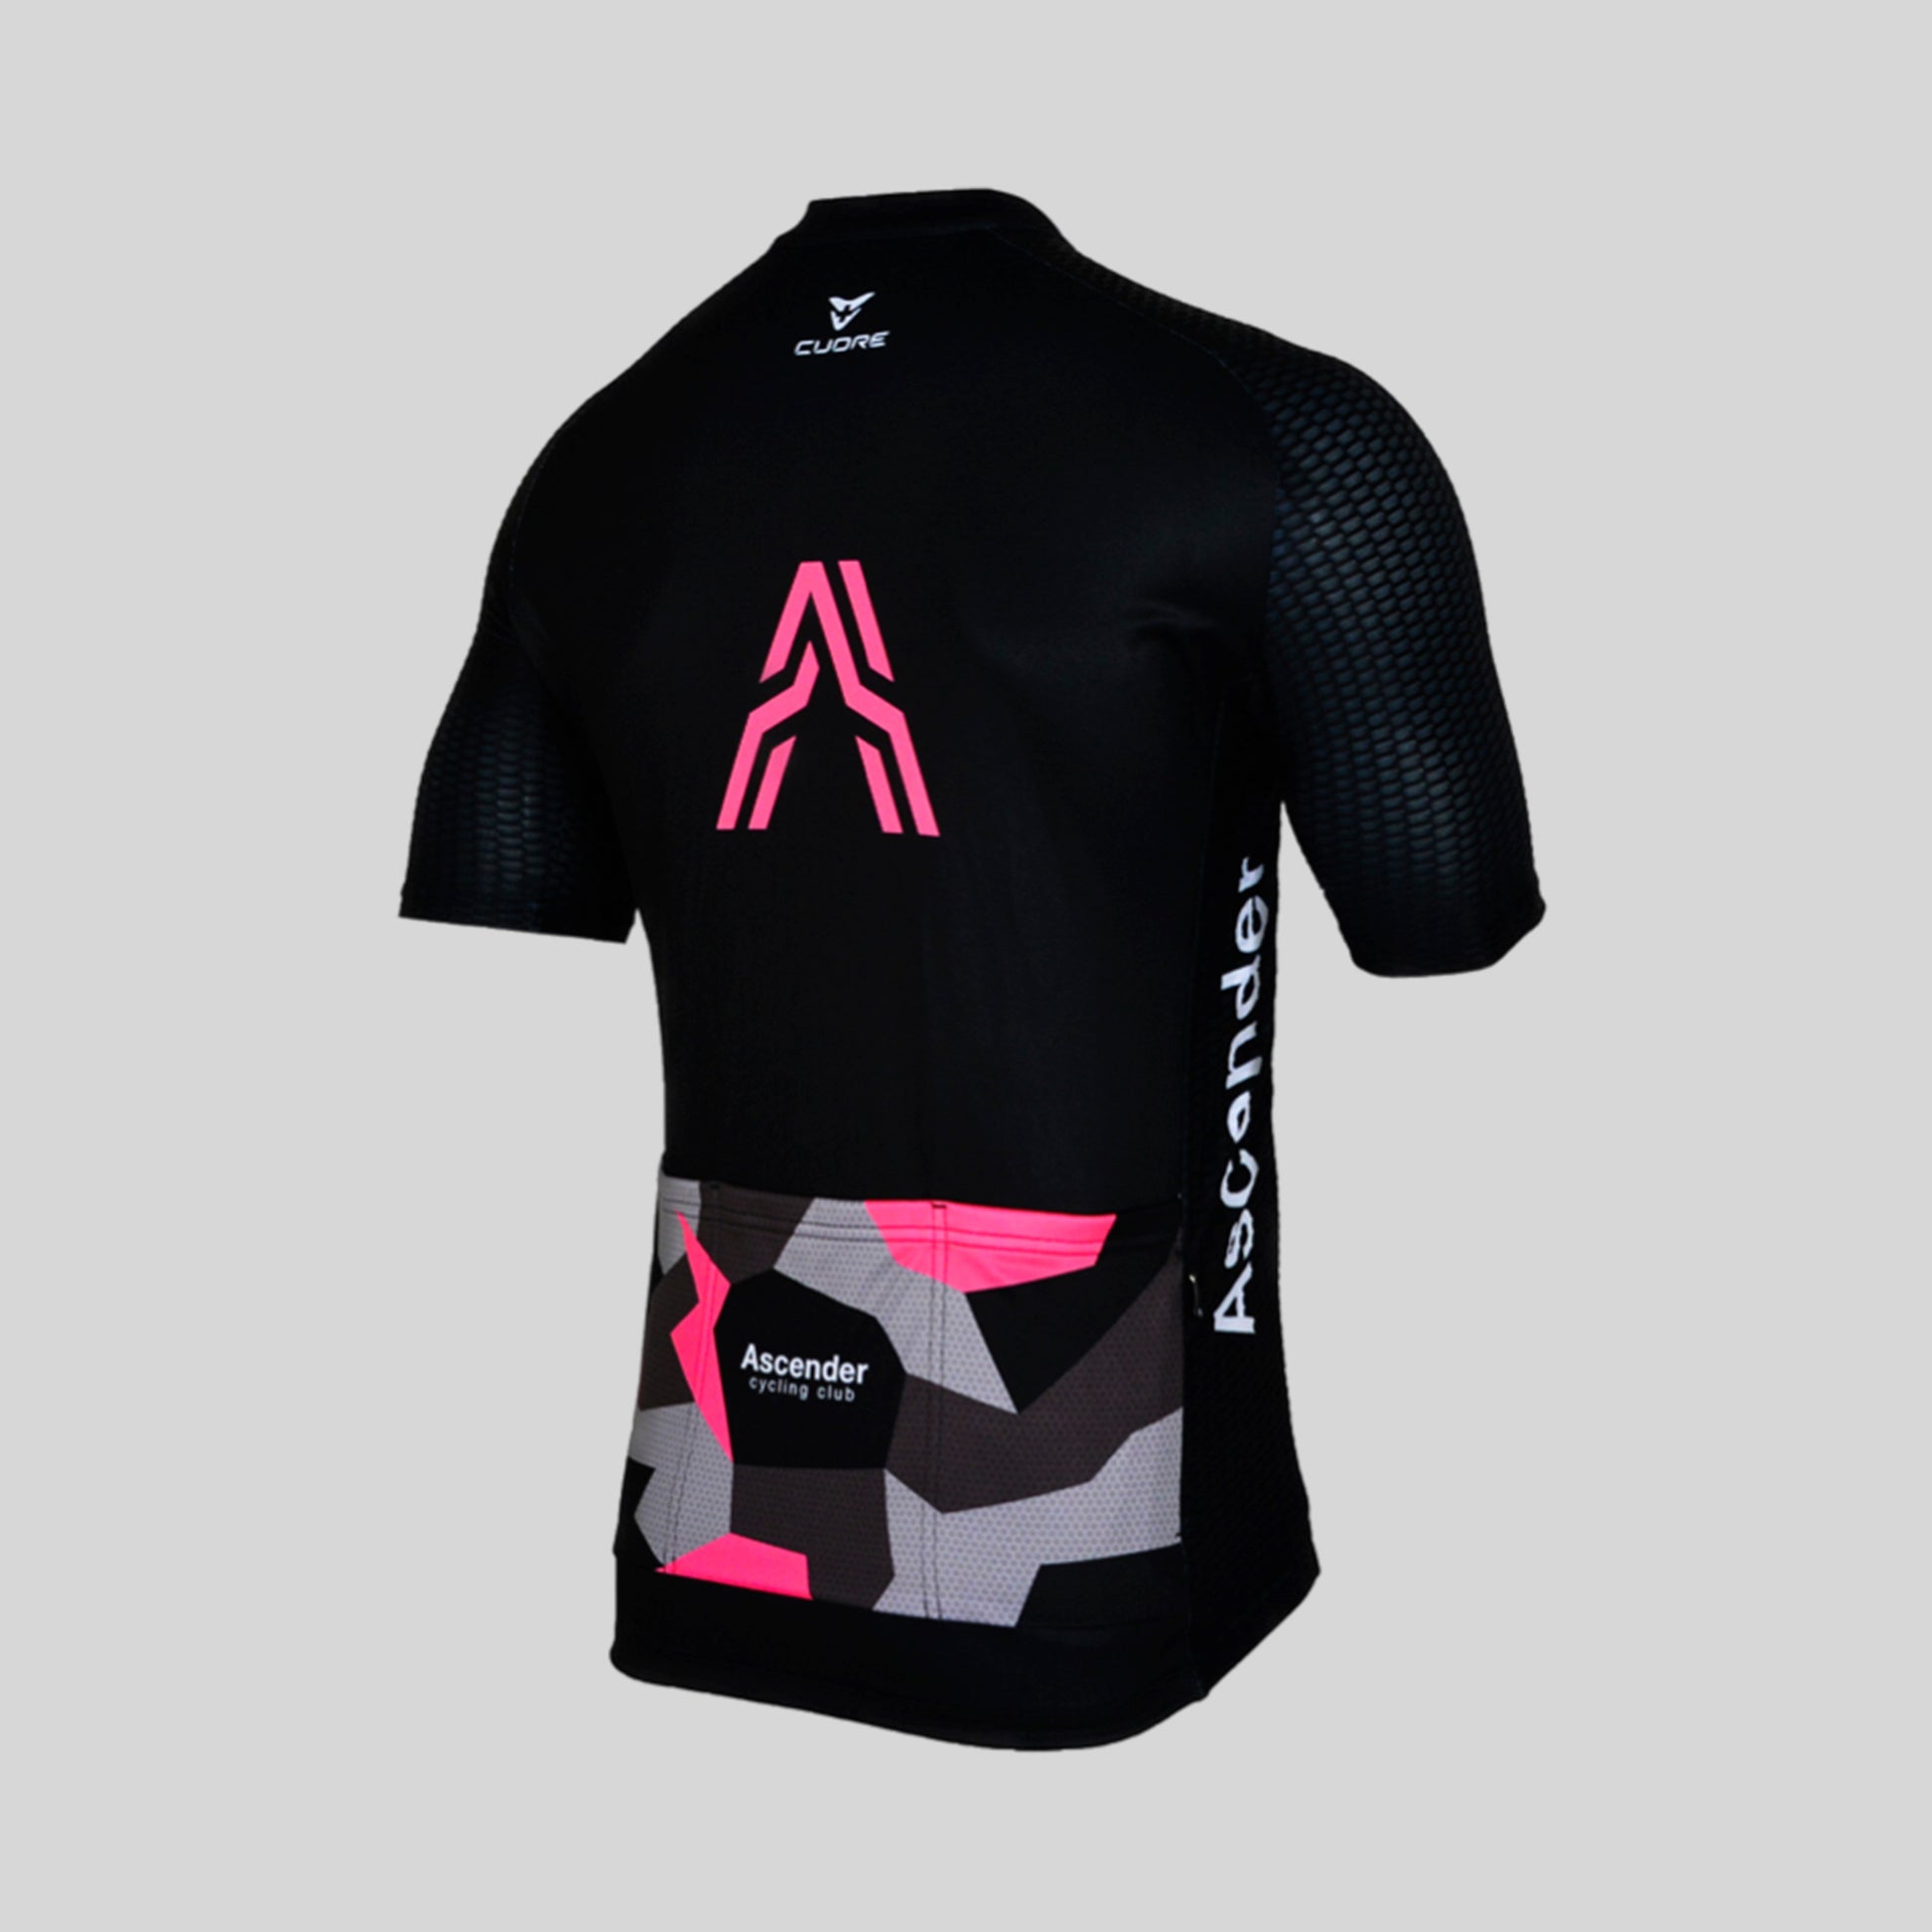 Lightning Bolt Camo Neon Pink Short Sleeves Jersey from Ascender Cycling Club 3D Back View